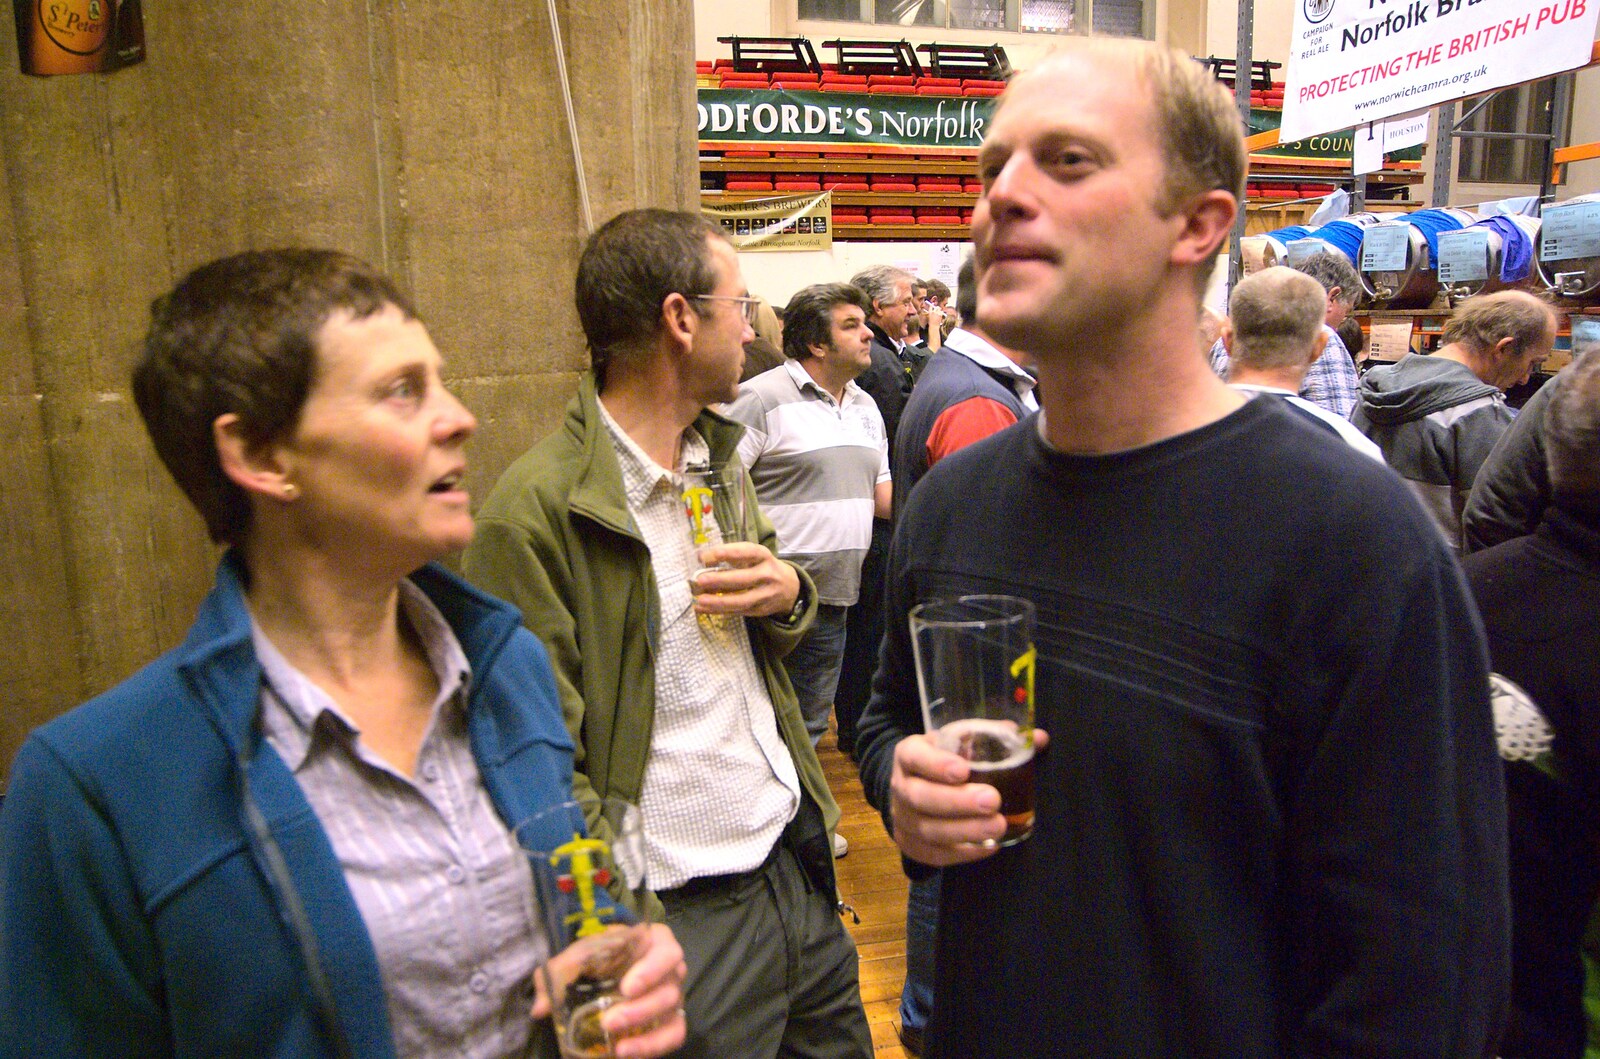 Pippa, Apple and Paul from The CAMRA Norwich Beer Festival, St. Andrew's Hall, Norwich - 26th October 2011